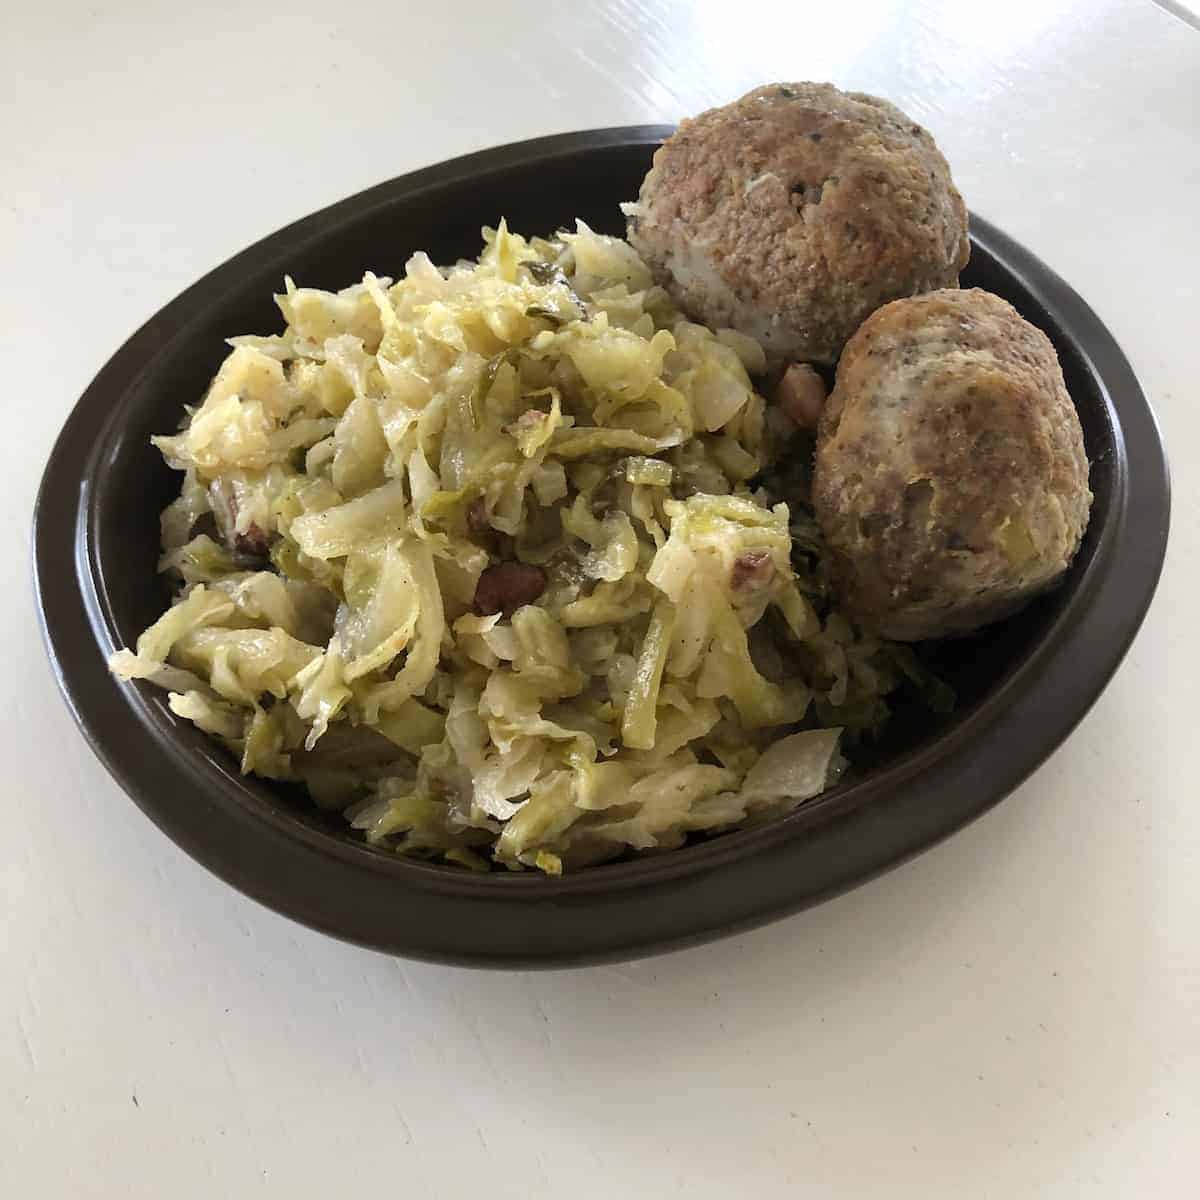 Easy sauerkraut and meatballs recipe with young cabbage, tasting like summer.